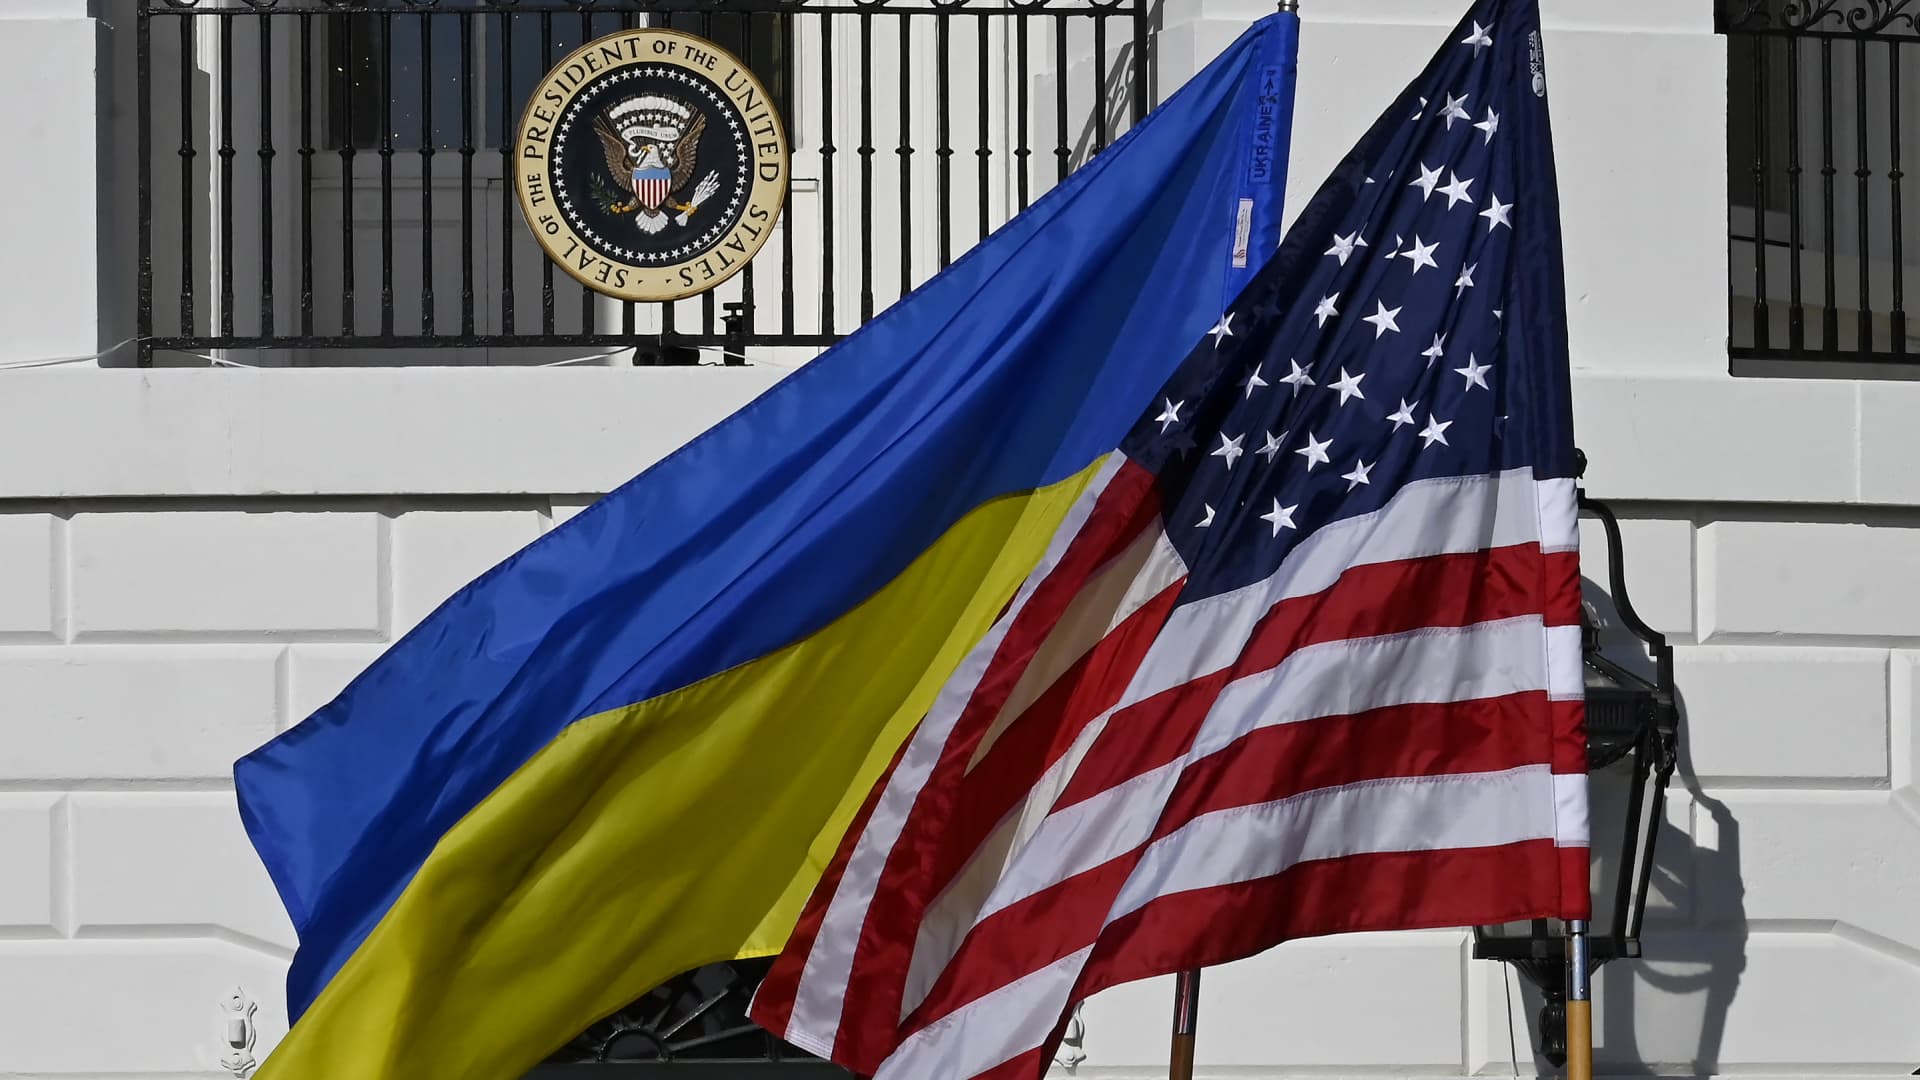 The US and Ukrainian float on the South Lawn of the White House ahead of a meeting between President Joe Biden and his Ukrainian counterpart Volodymyr Zelensky in Washington, DC on December 21, 2022.